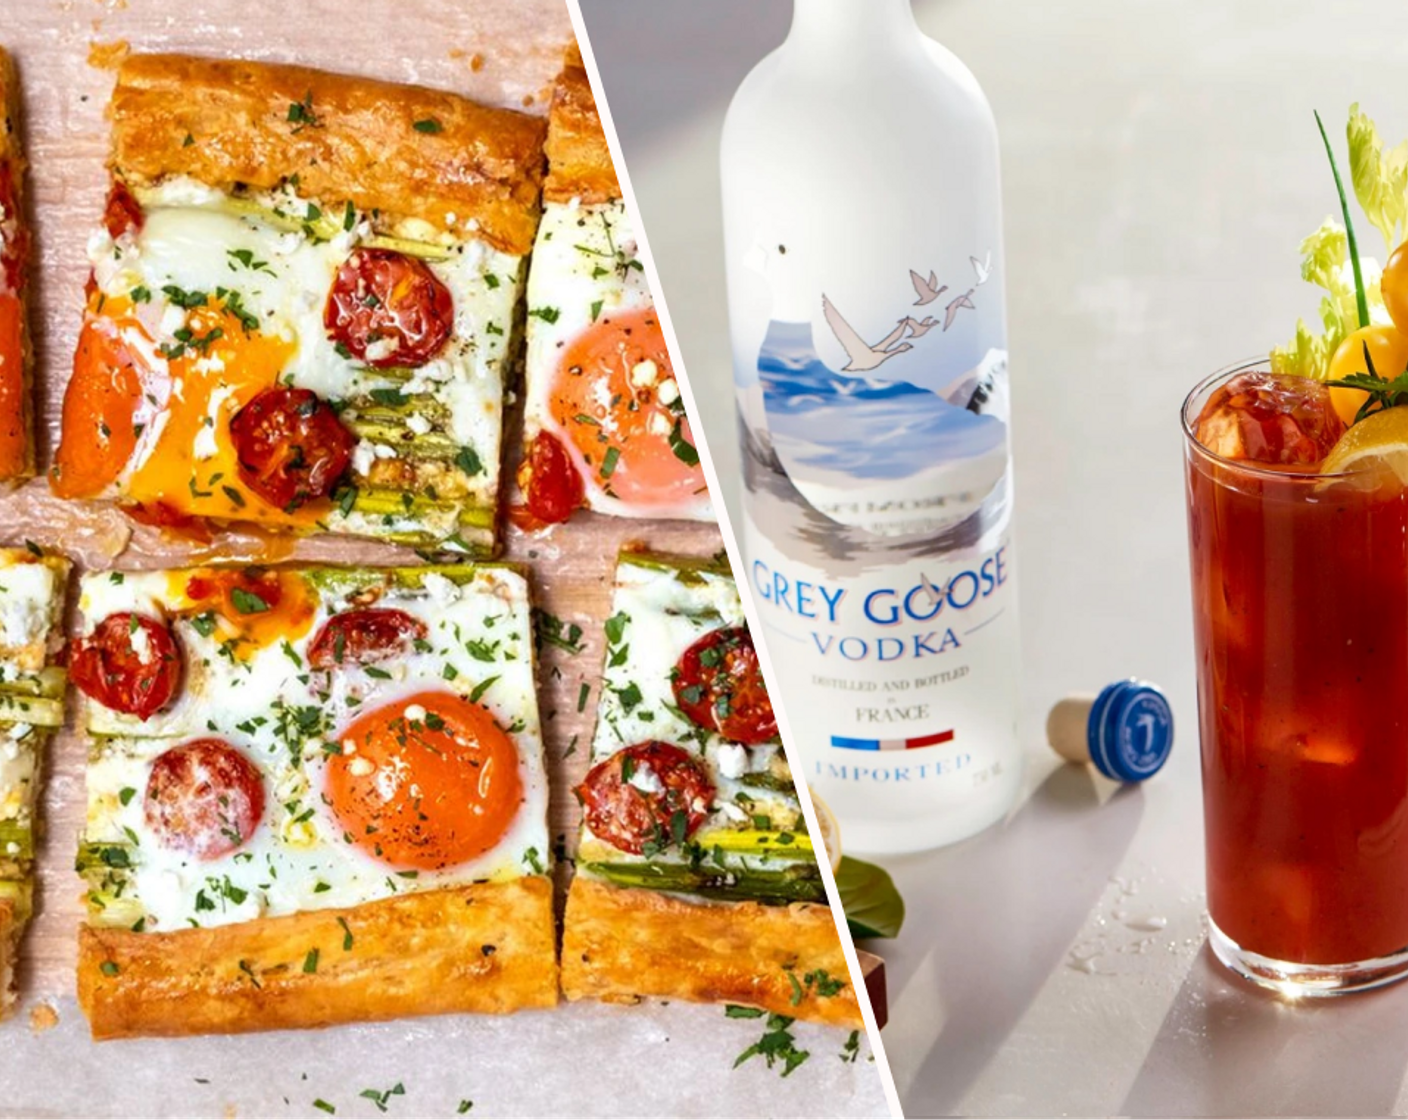 Asparagus Galette with Baked Eggs and Bloody Mary Cocktail